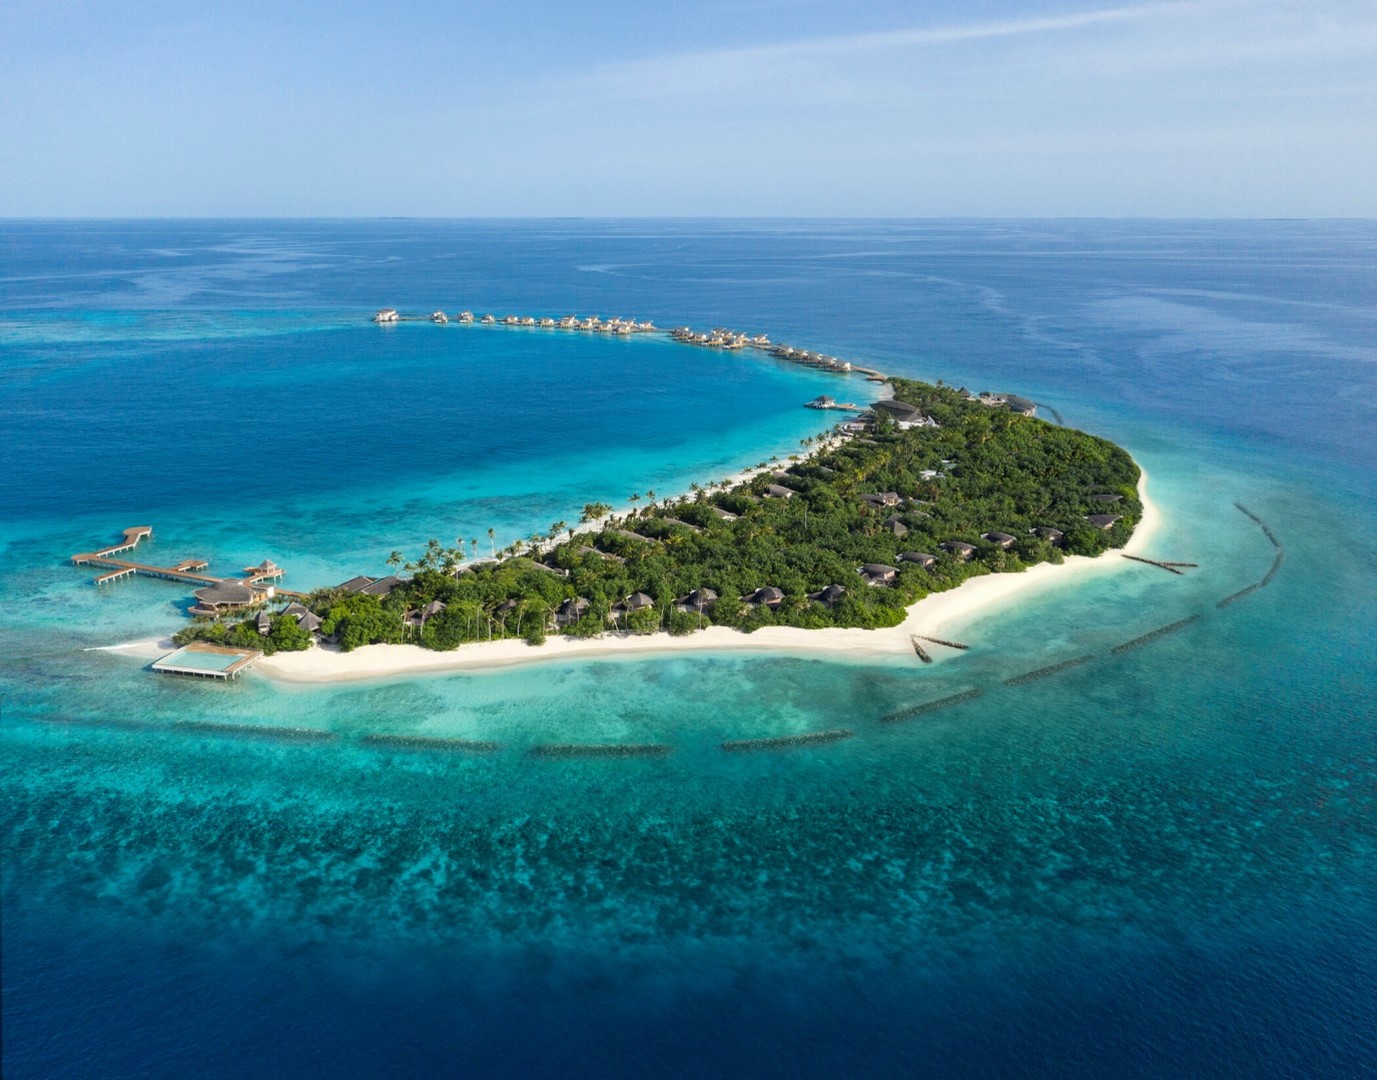 Image for Sense & Sustainability: JW Marriott Maldives Resort & Spa Promotes Preservation With Sustainable Activities For The Whole Family